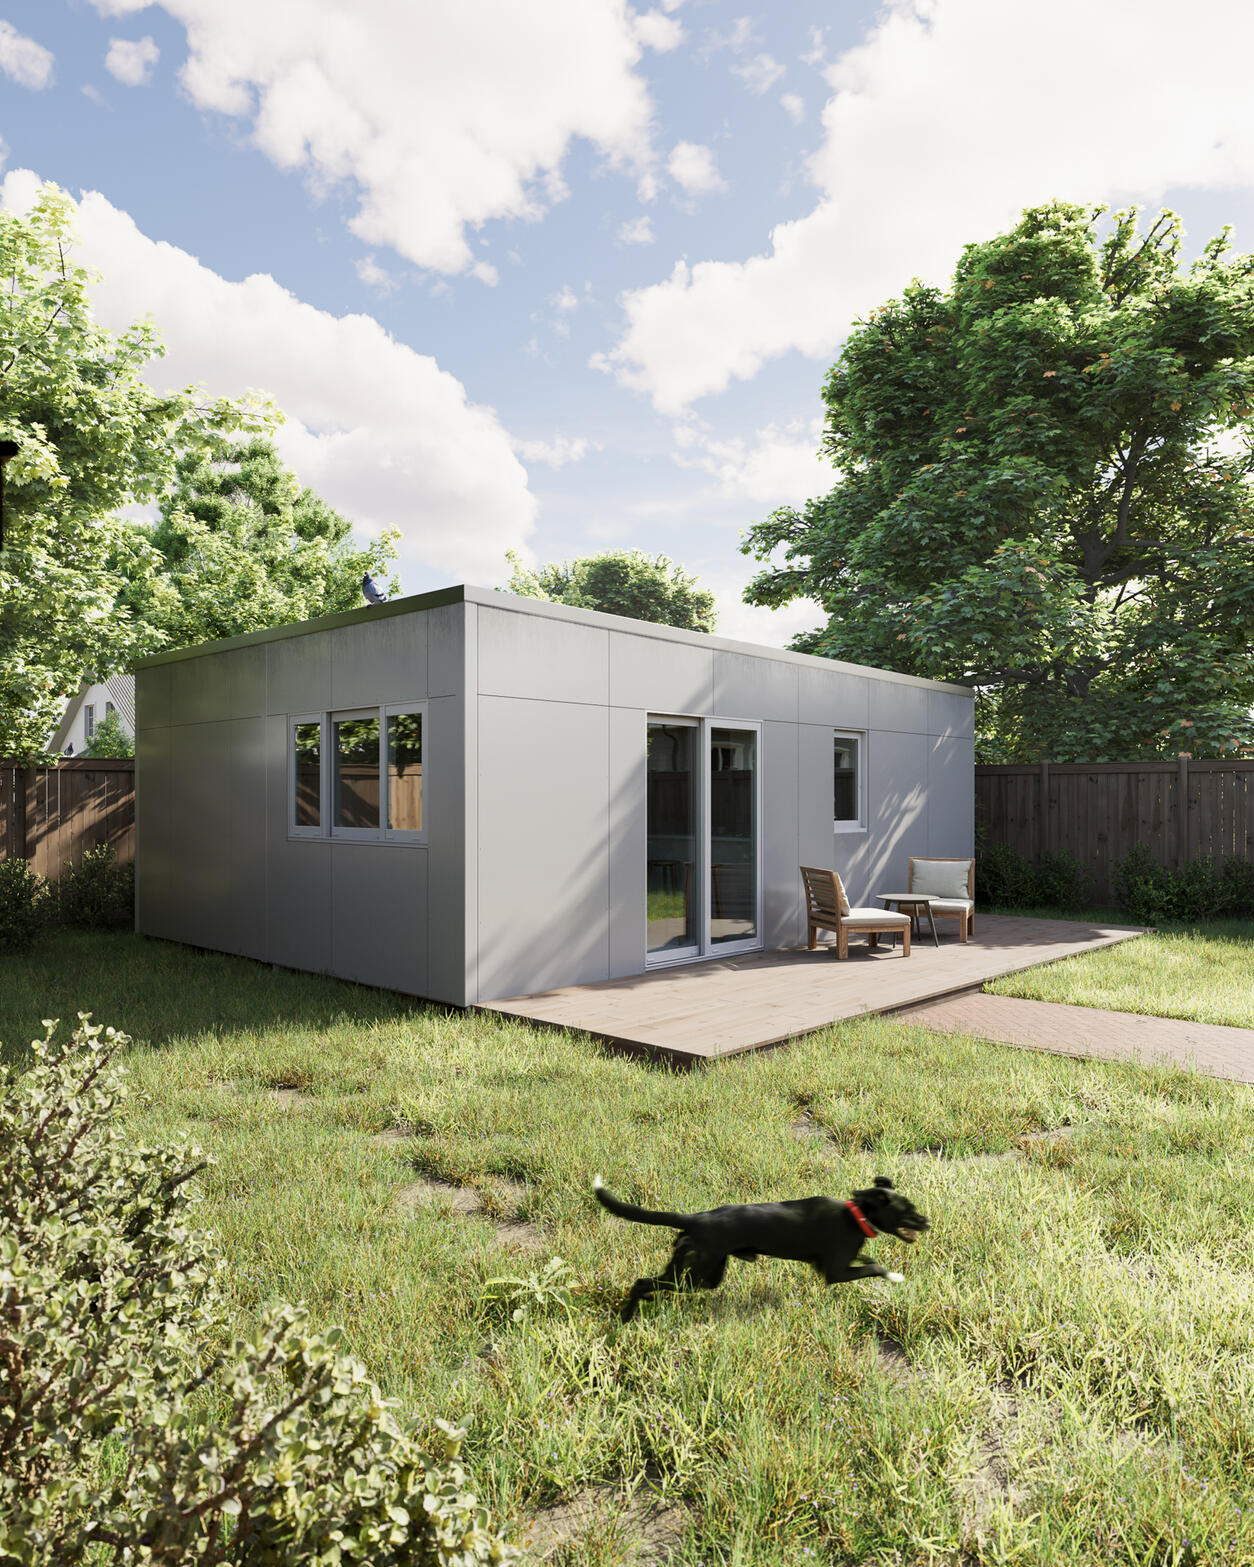 Manufactured Home Concept: DOMKA